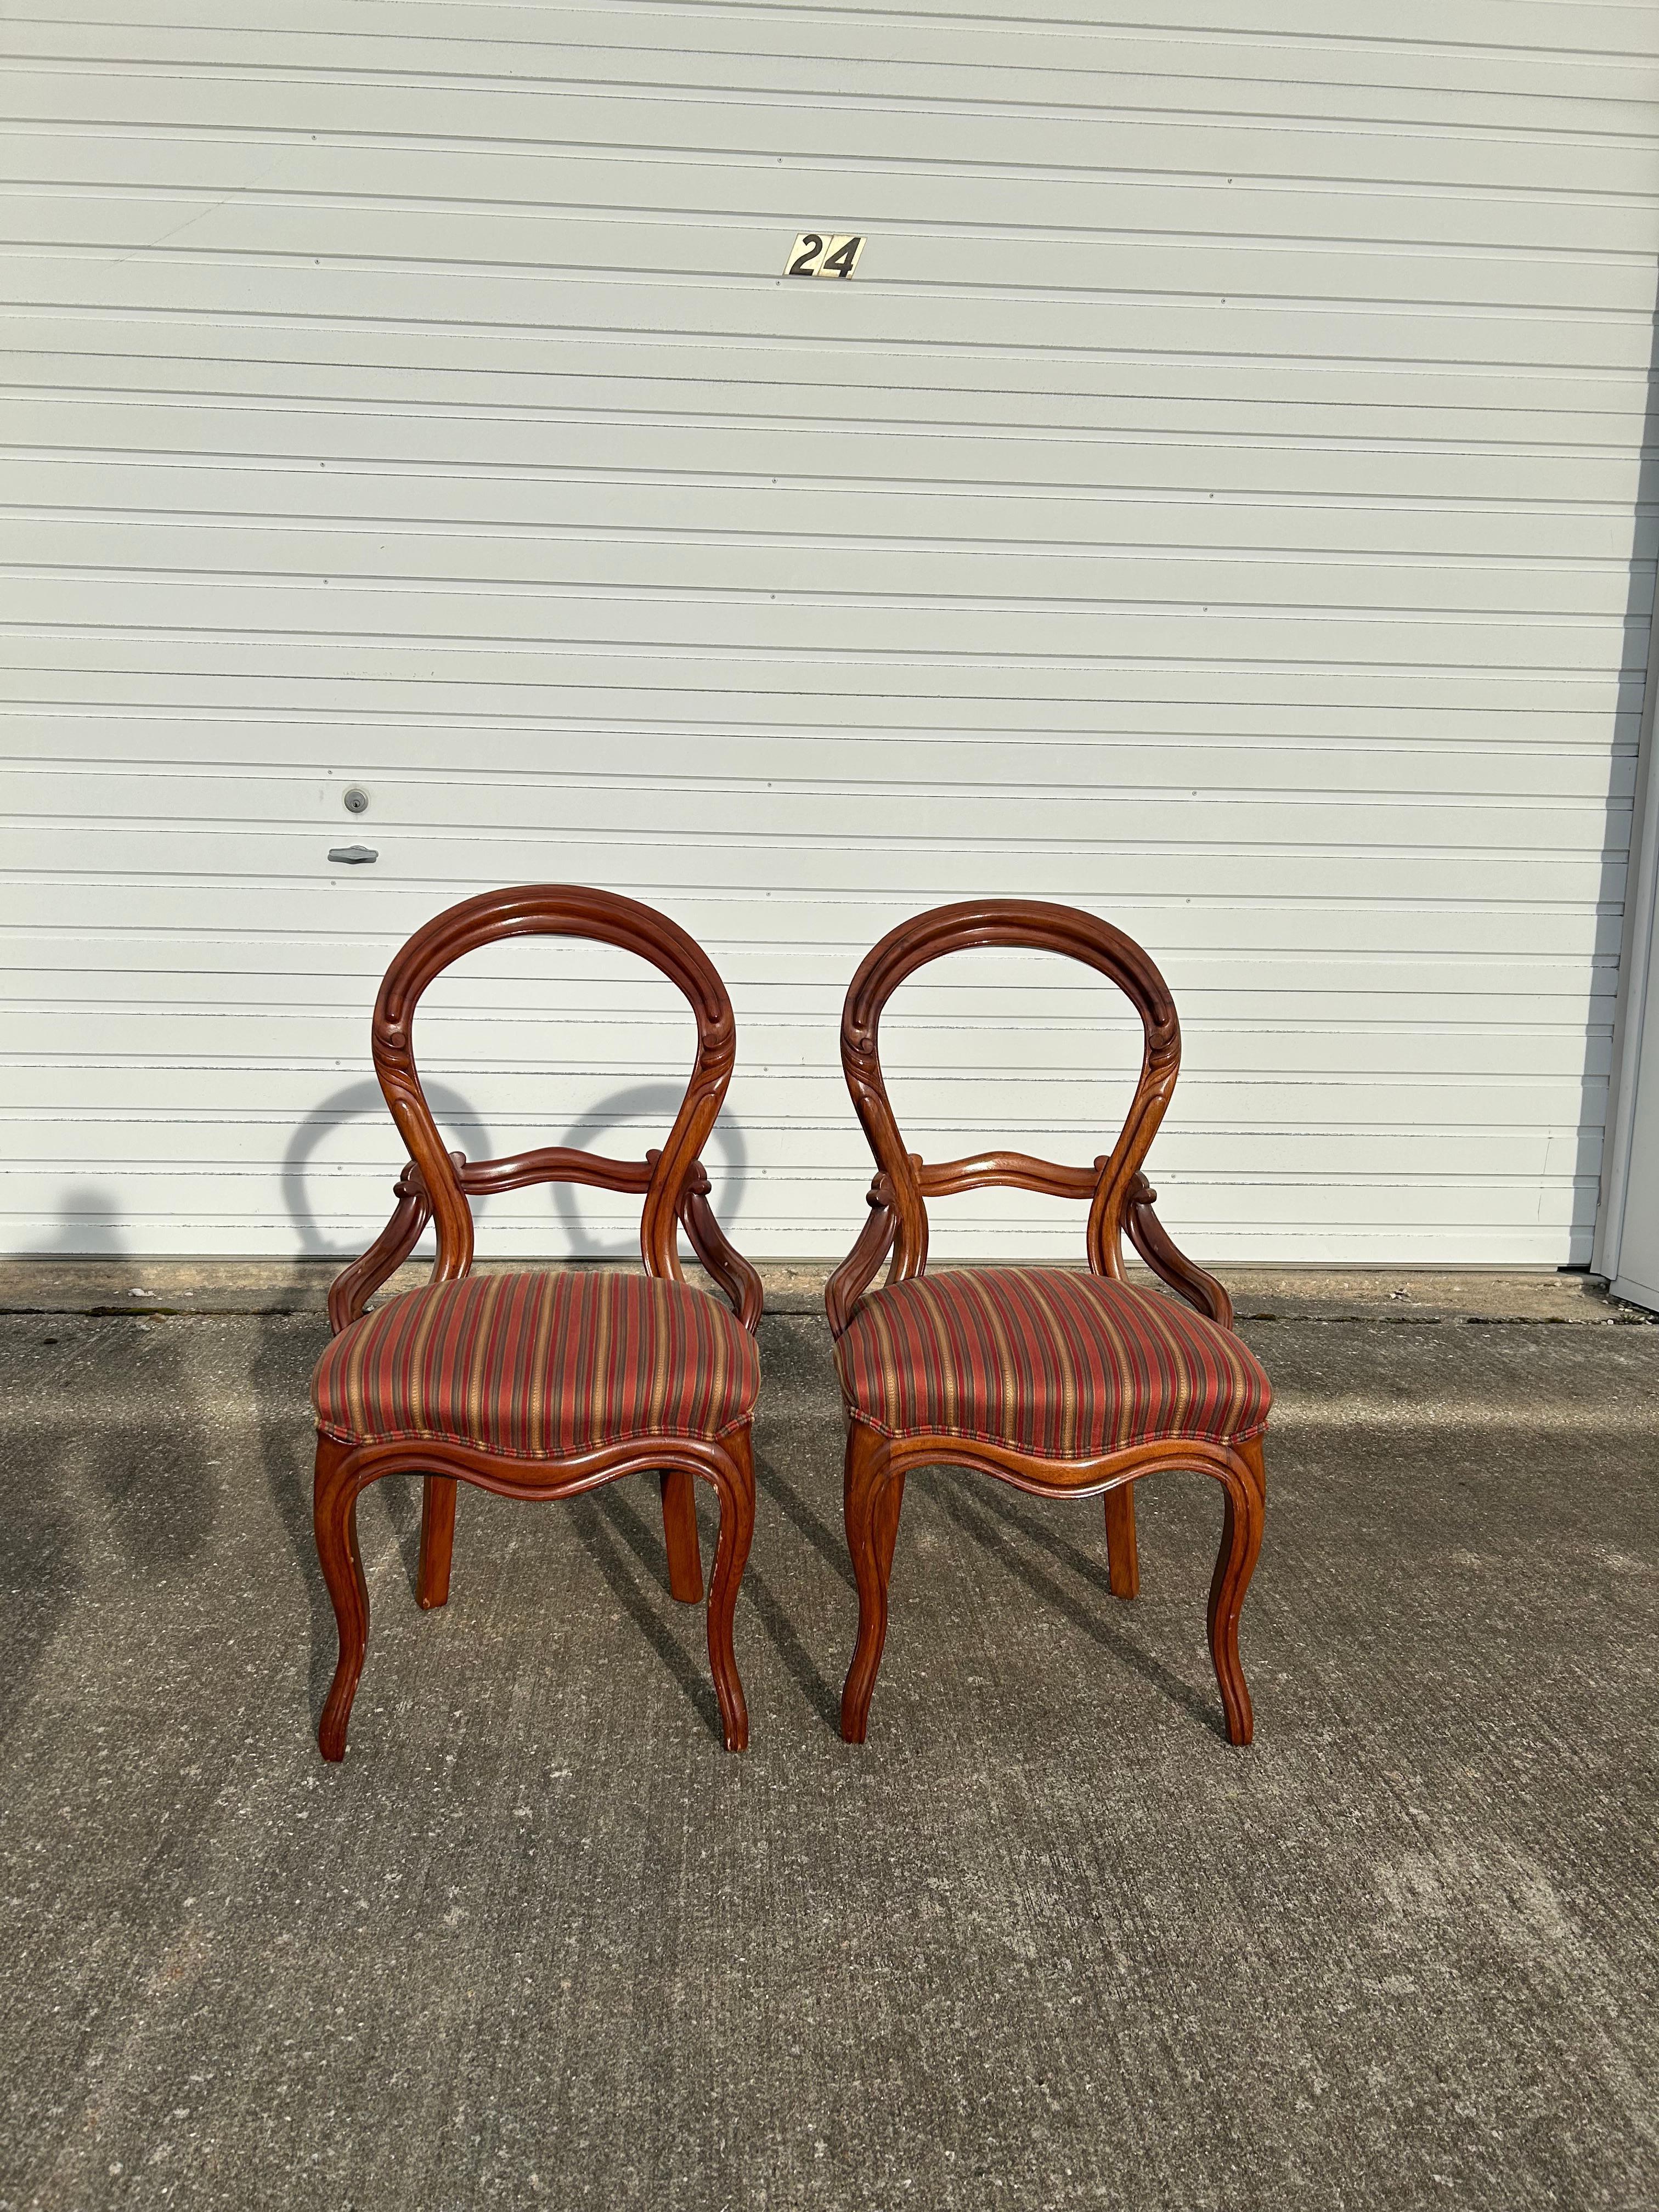 Pair of early Victorian side chairs in the style of John Henry Belter. These chairs are very unique and hold a pretty nice fabric, it does not seem like there are any stains or rips. The wood does need to be touched up due to its age, see pictures.